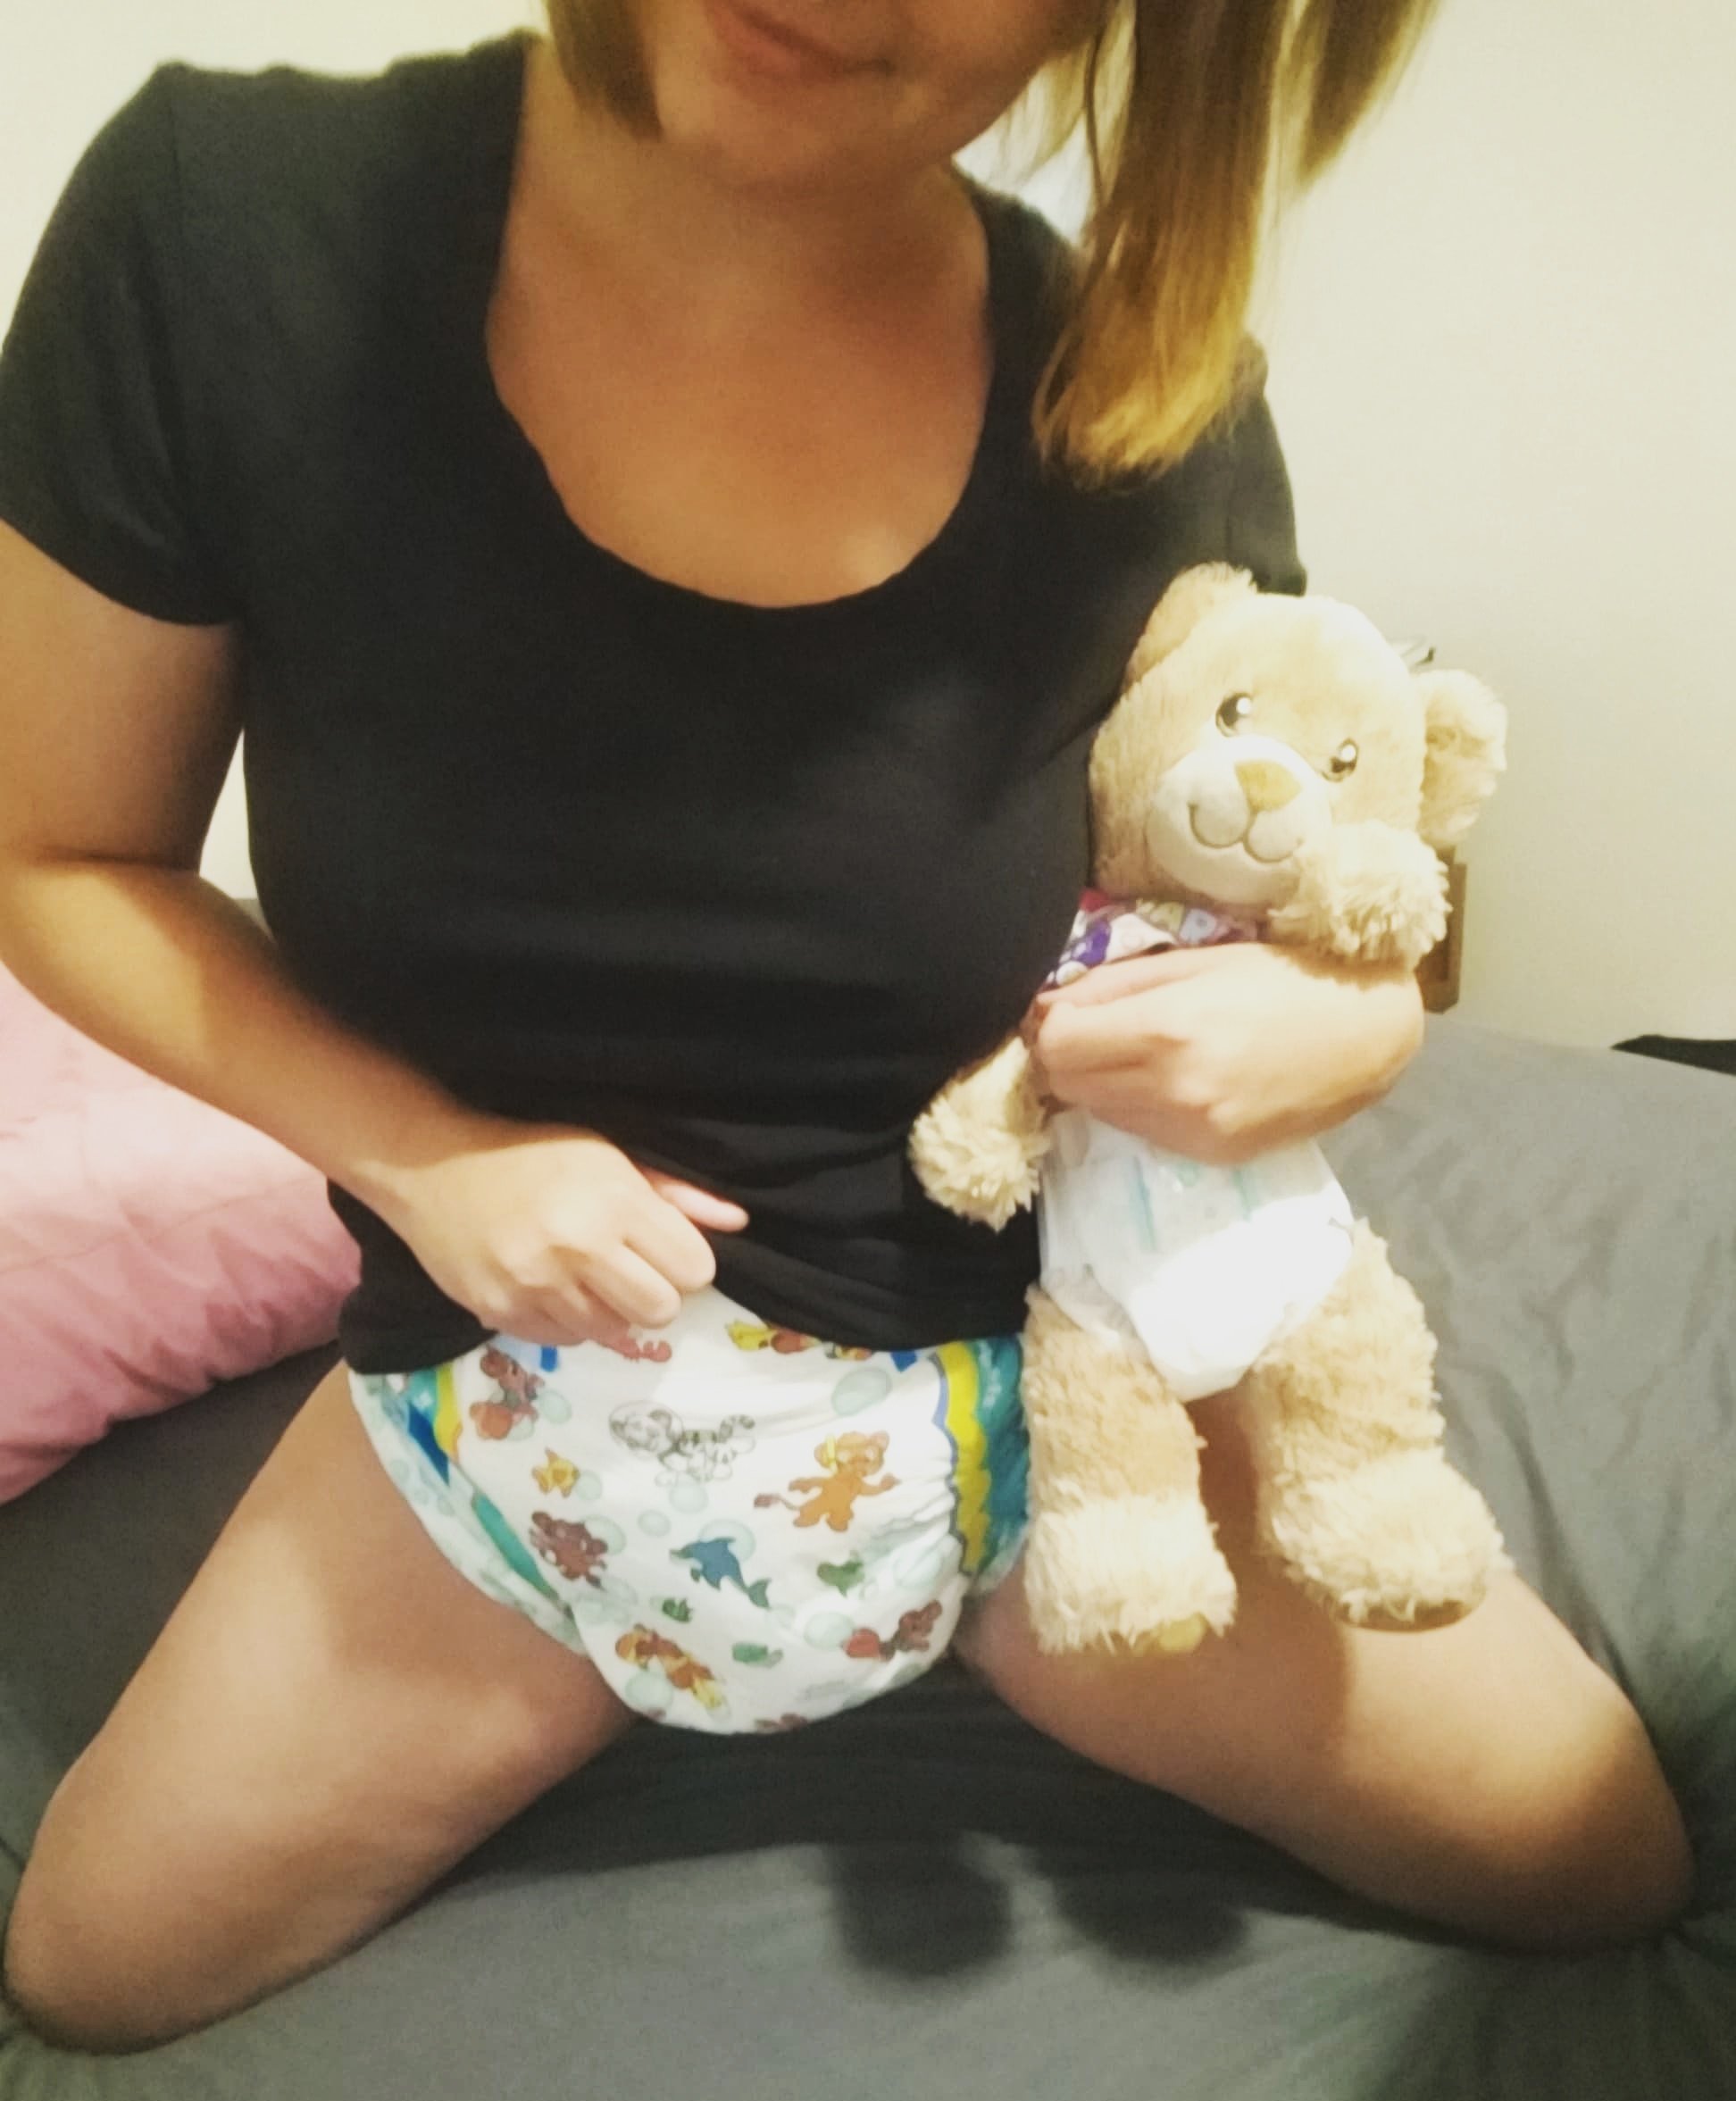 They had plastic doll diapers at Wal-Mart so Bean and I decided to match! 